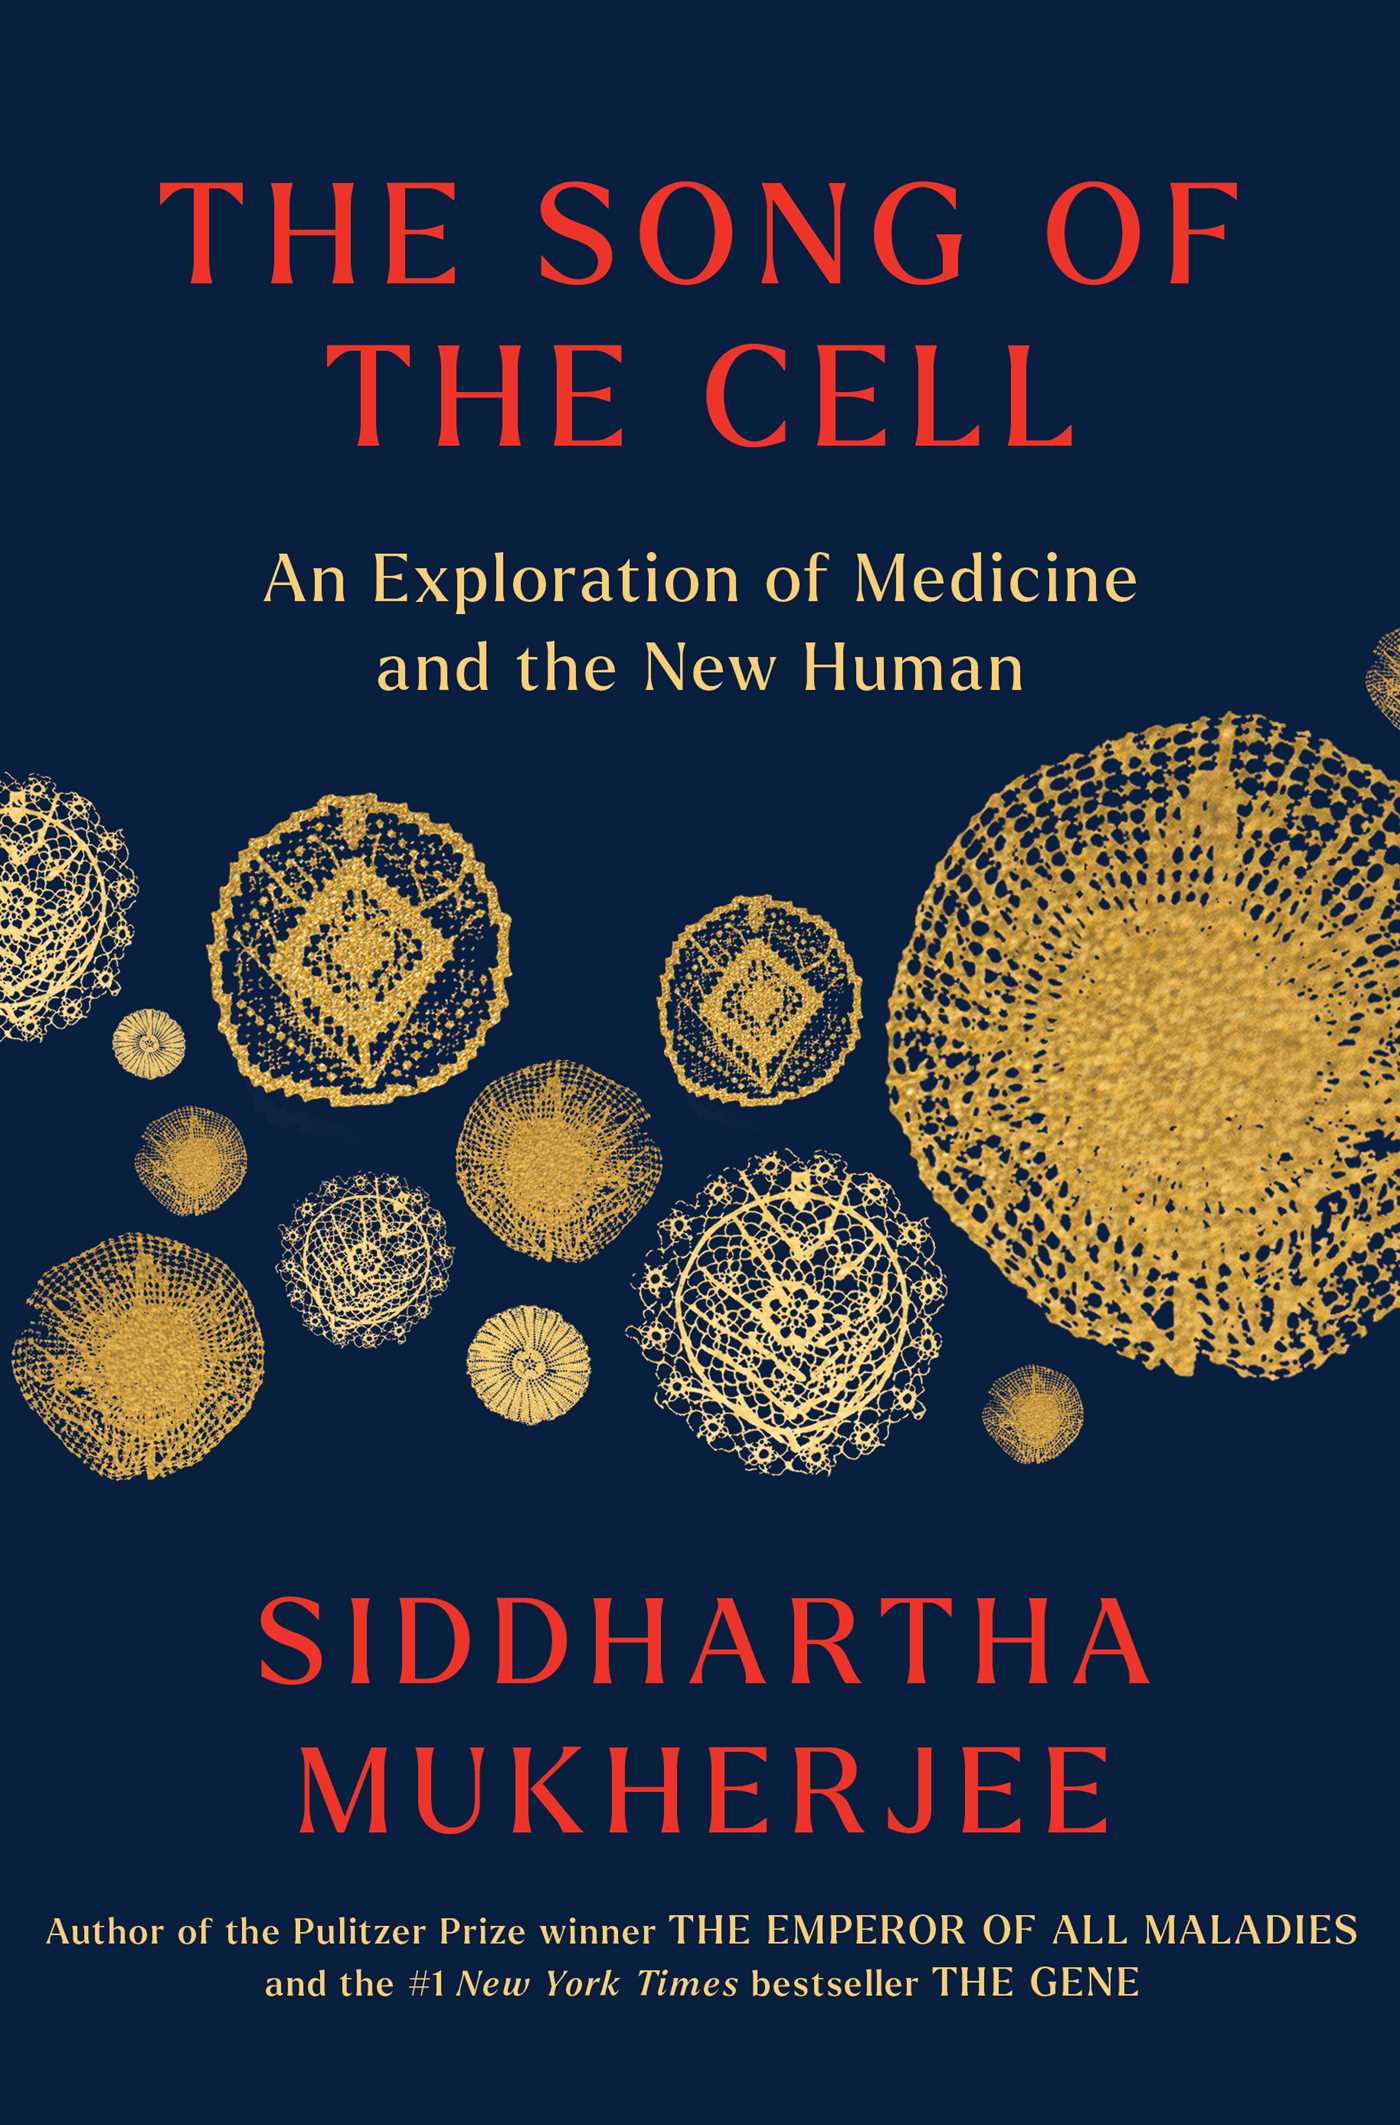 The Song of the Cell By Siddhartha Mukherjee